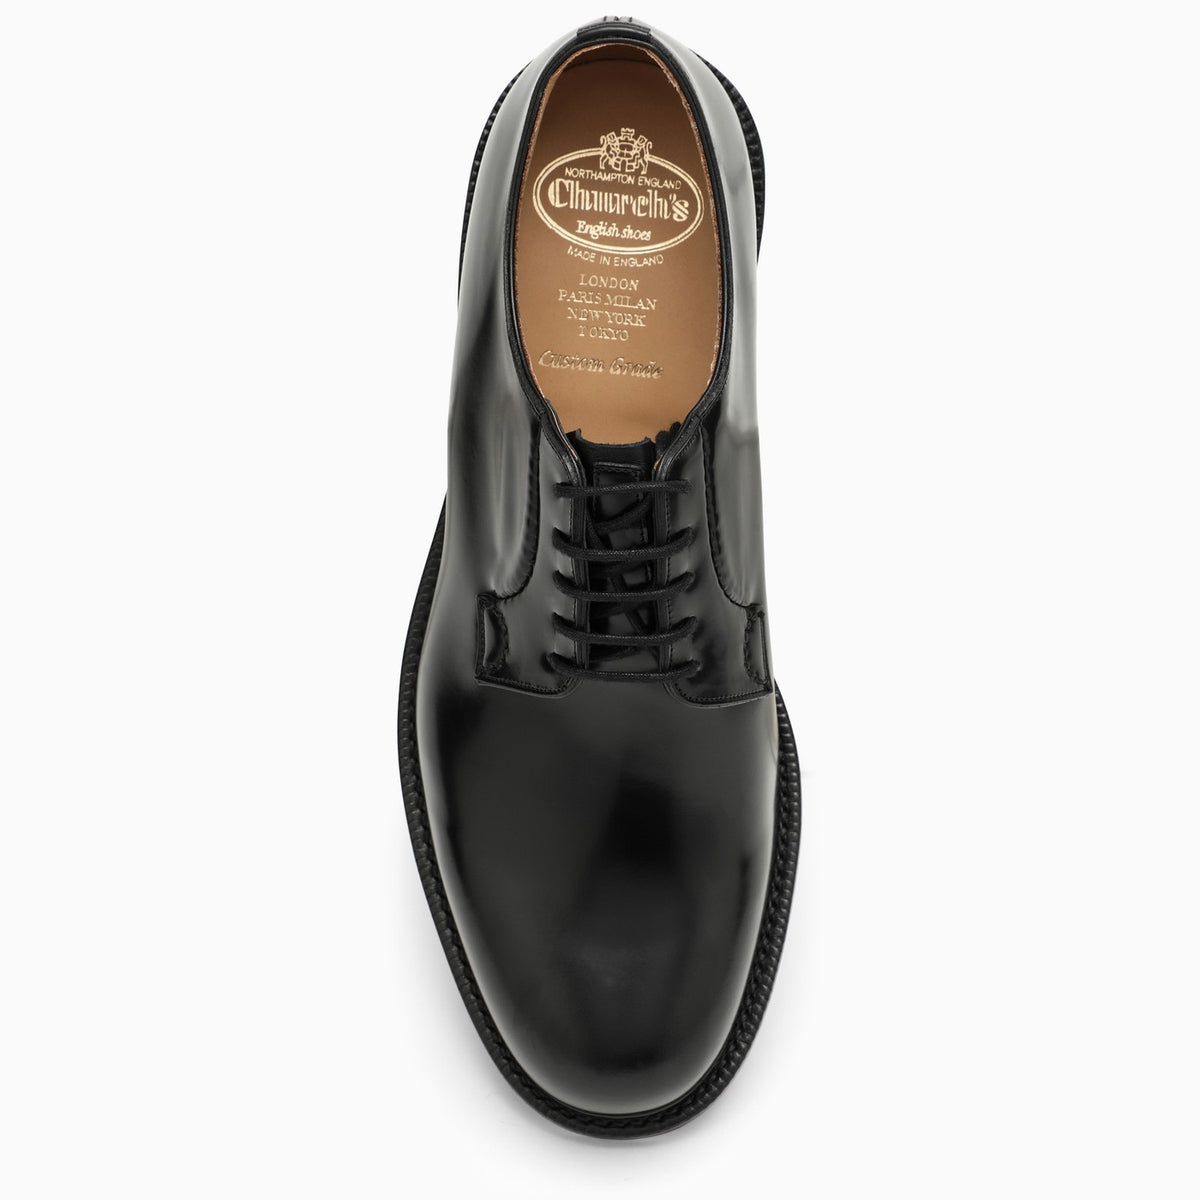 Shannon 2 Wr Derby shoes